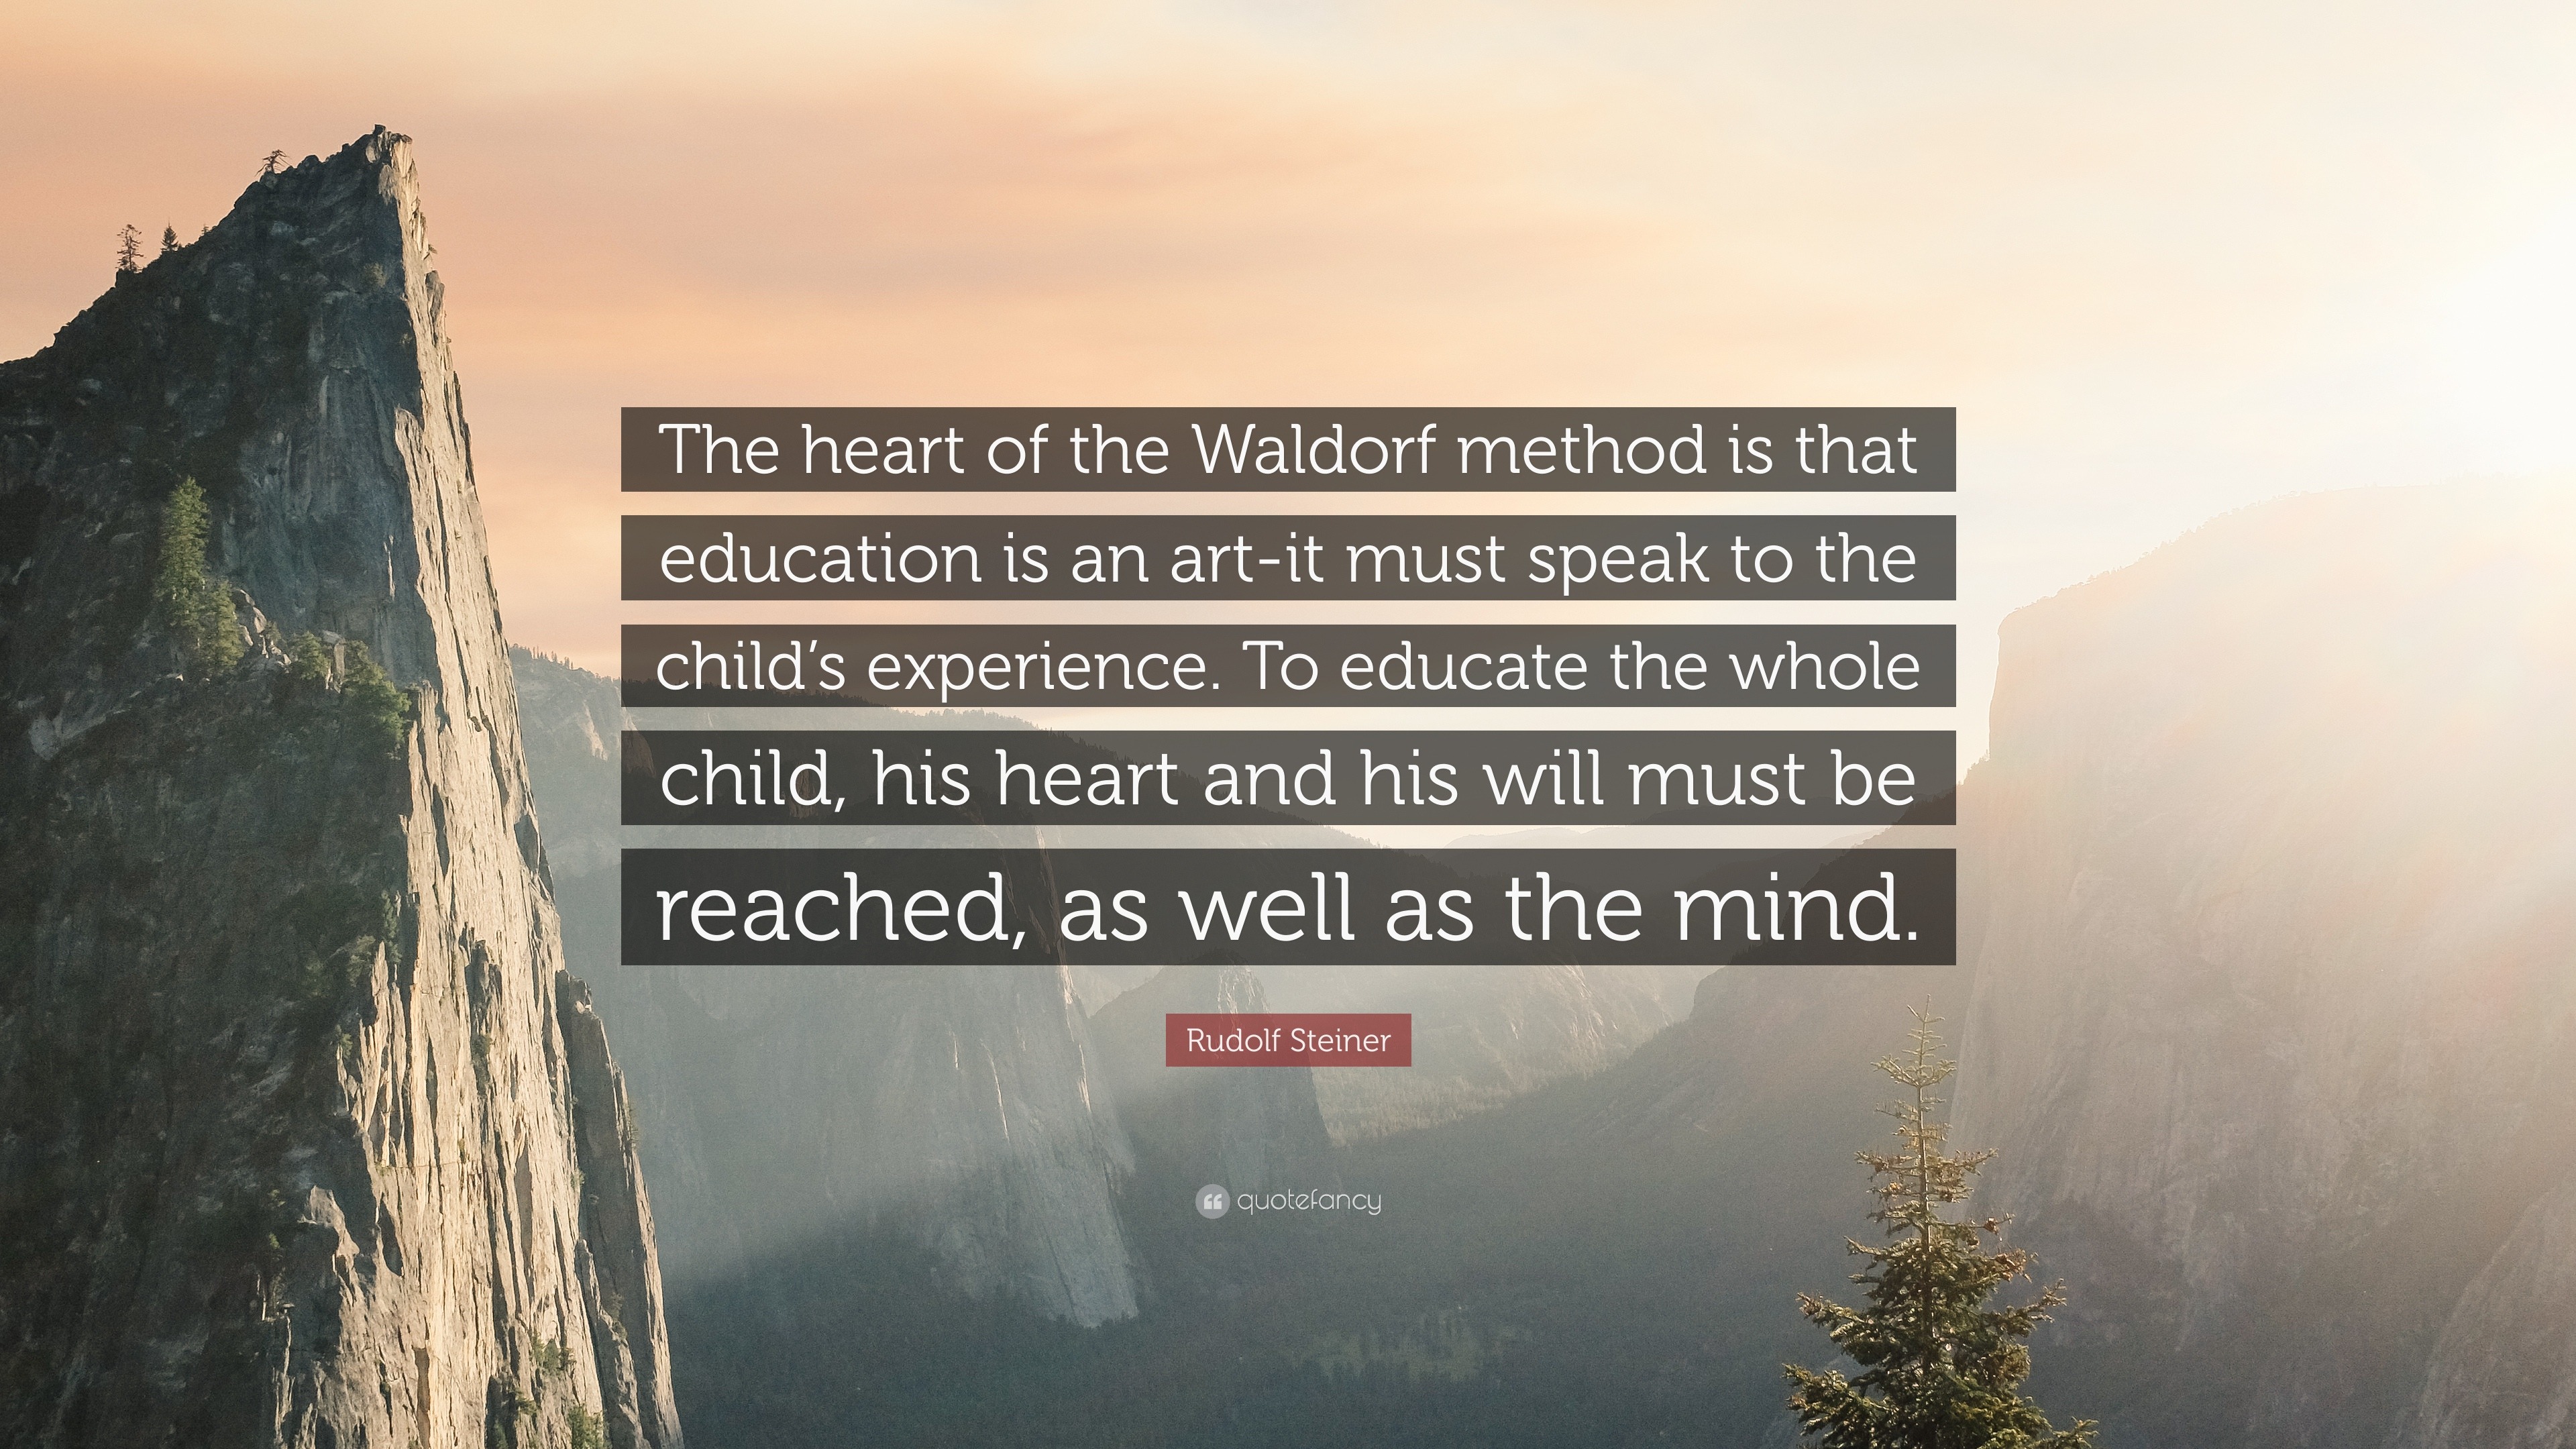 Rudolf Steiner Quote: “The heart of the Waldorf method is that